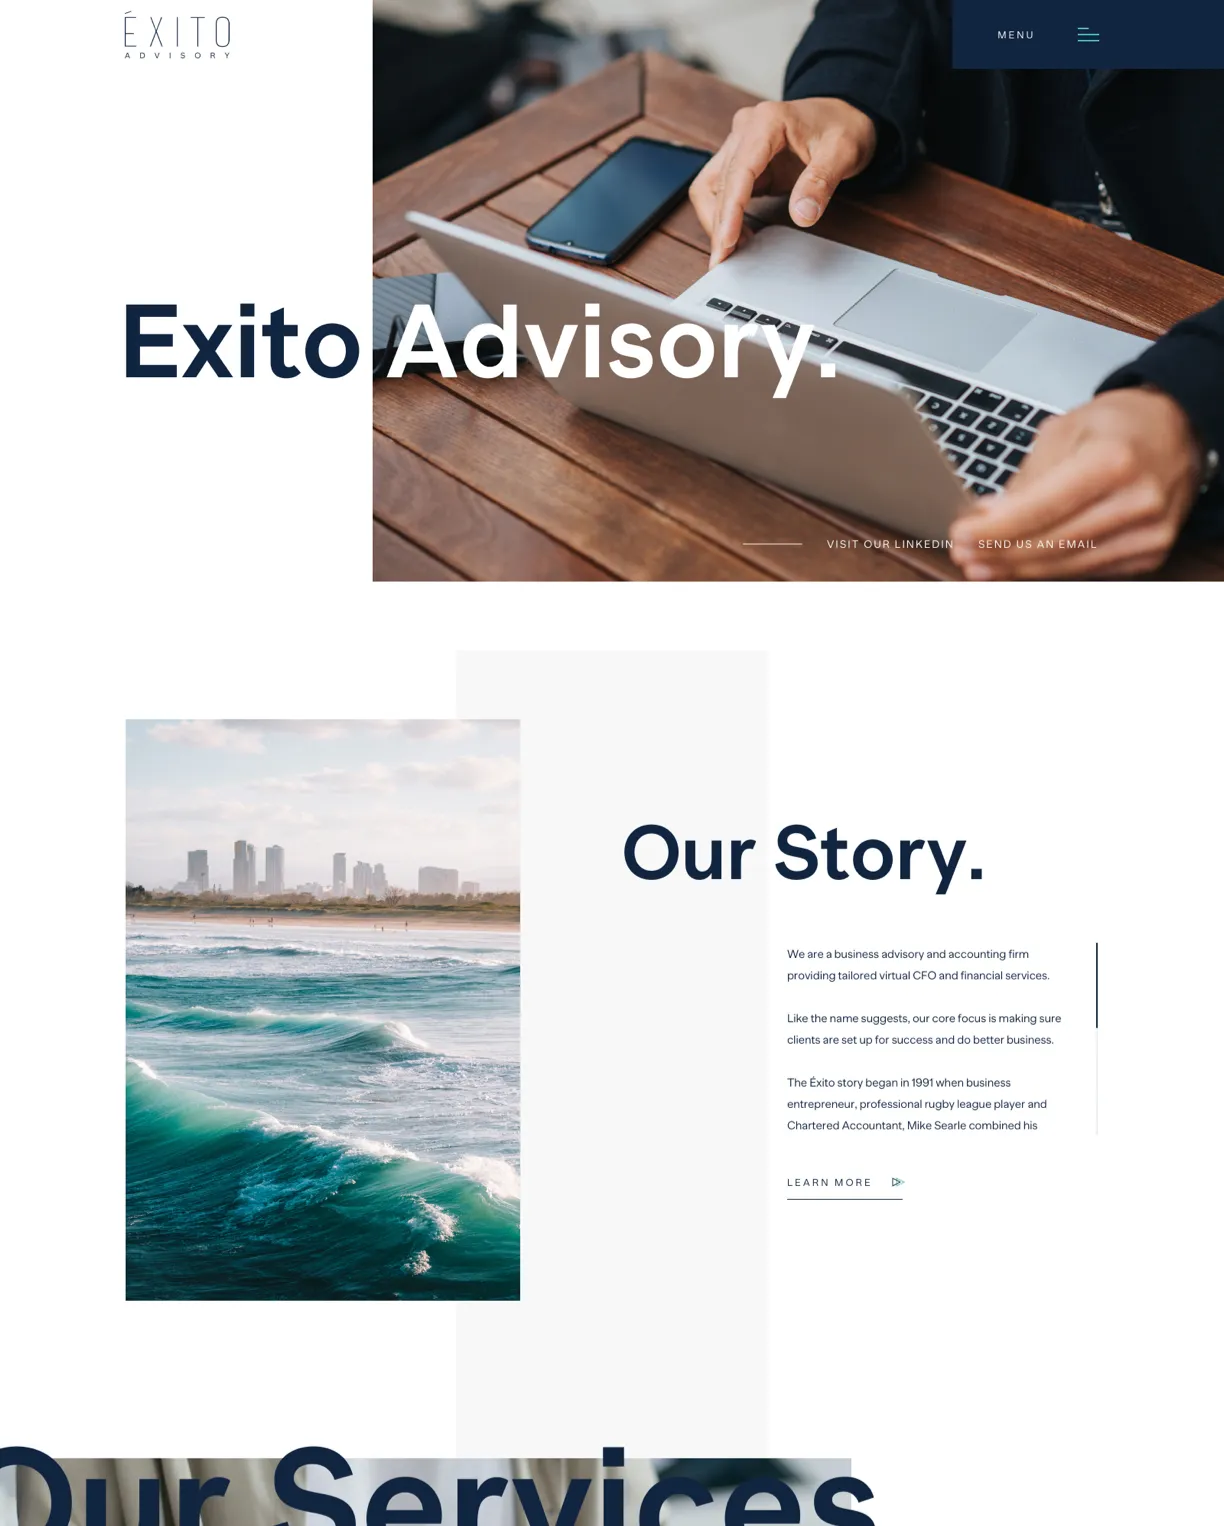 Exito Overview@2x